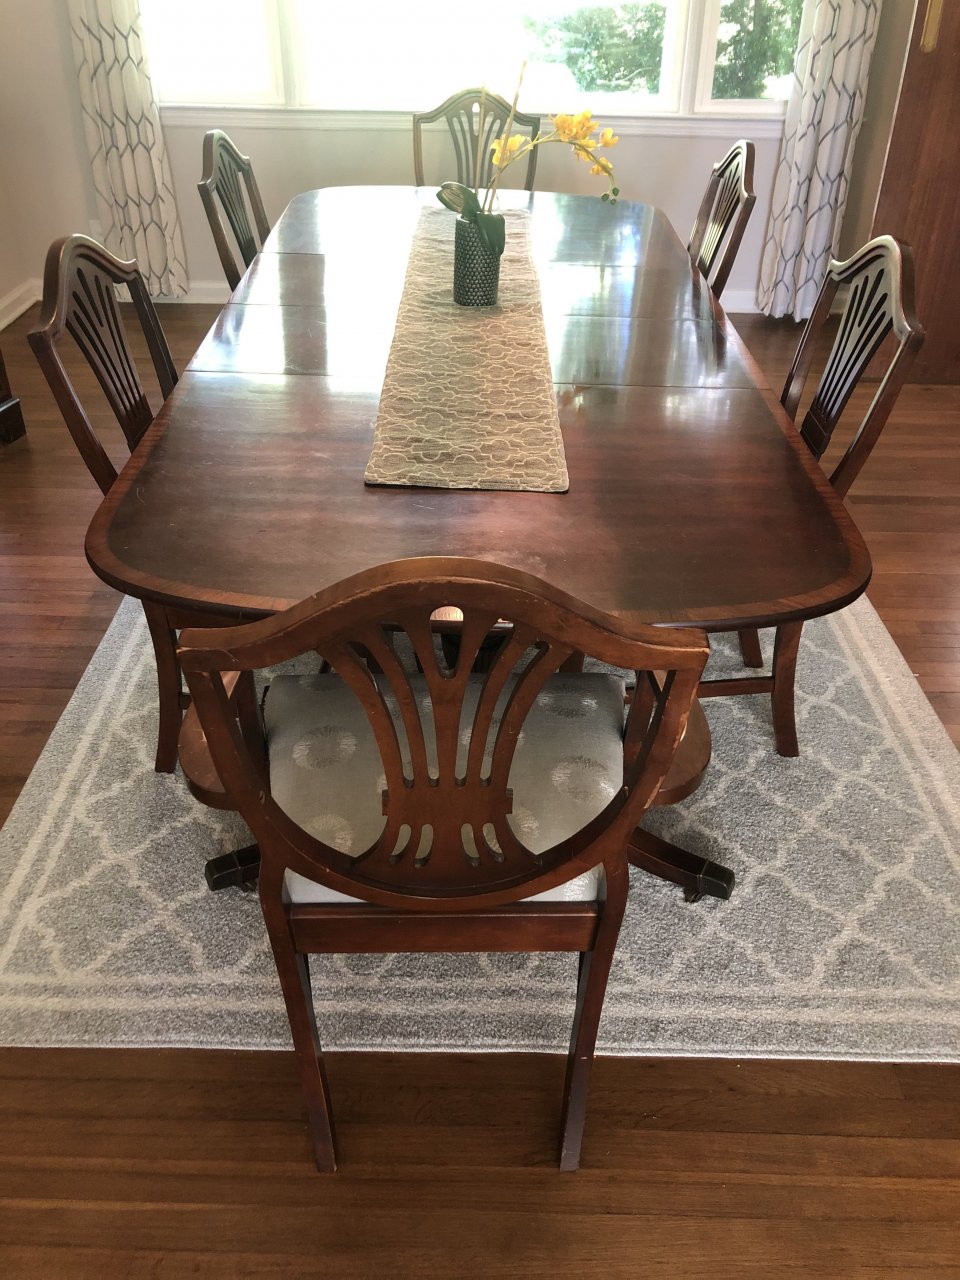 Lenoir Chair Dining Room Set (6 Chairs) My Antique